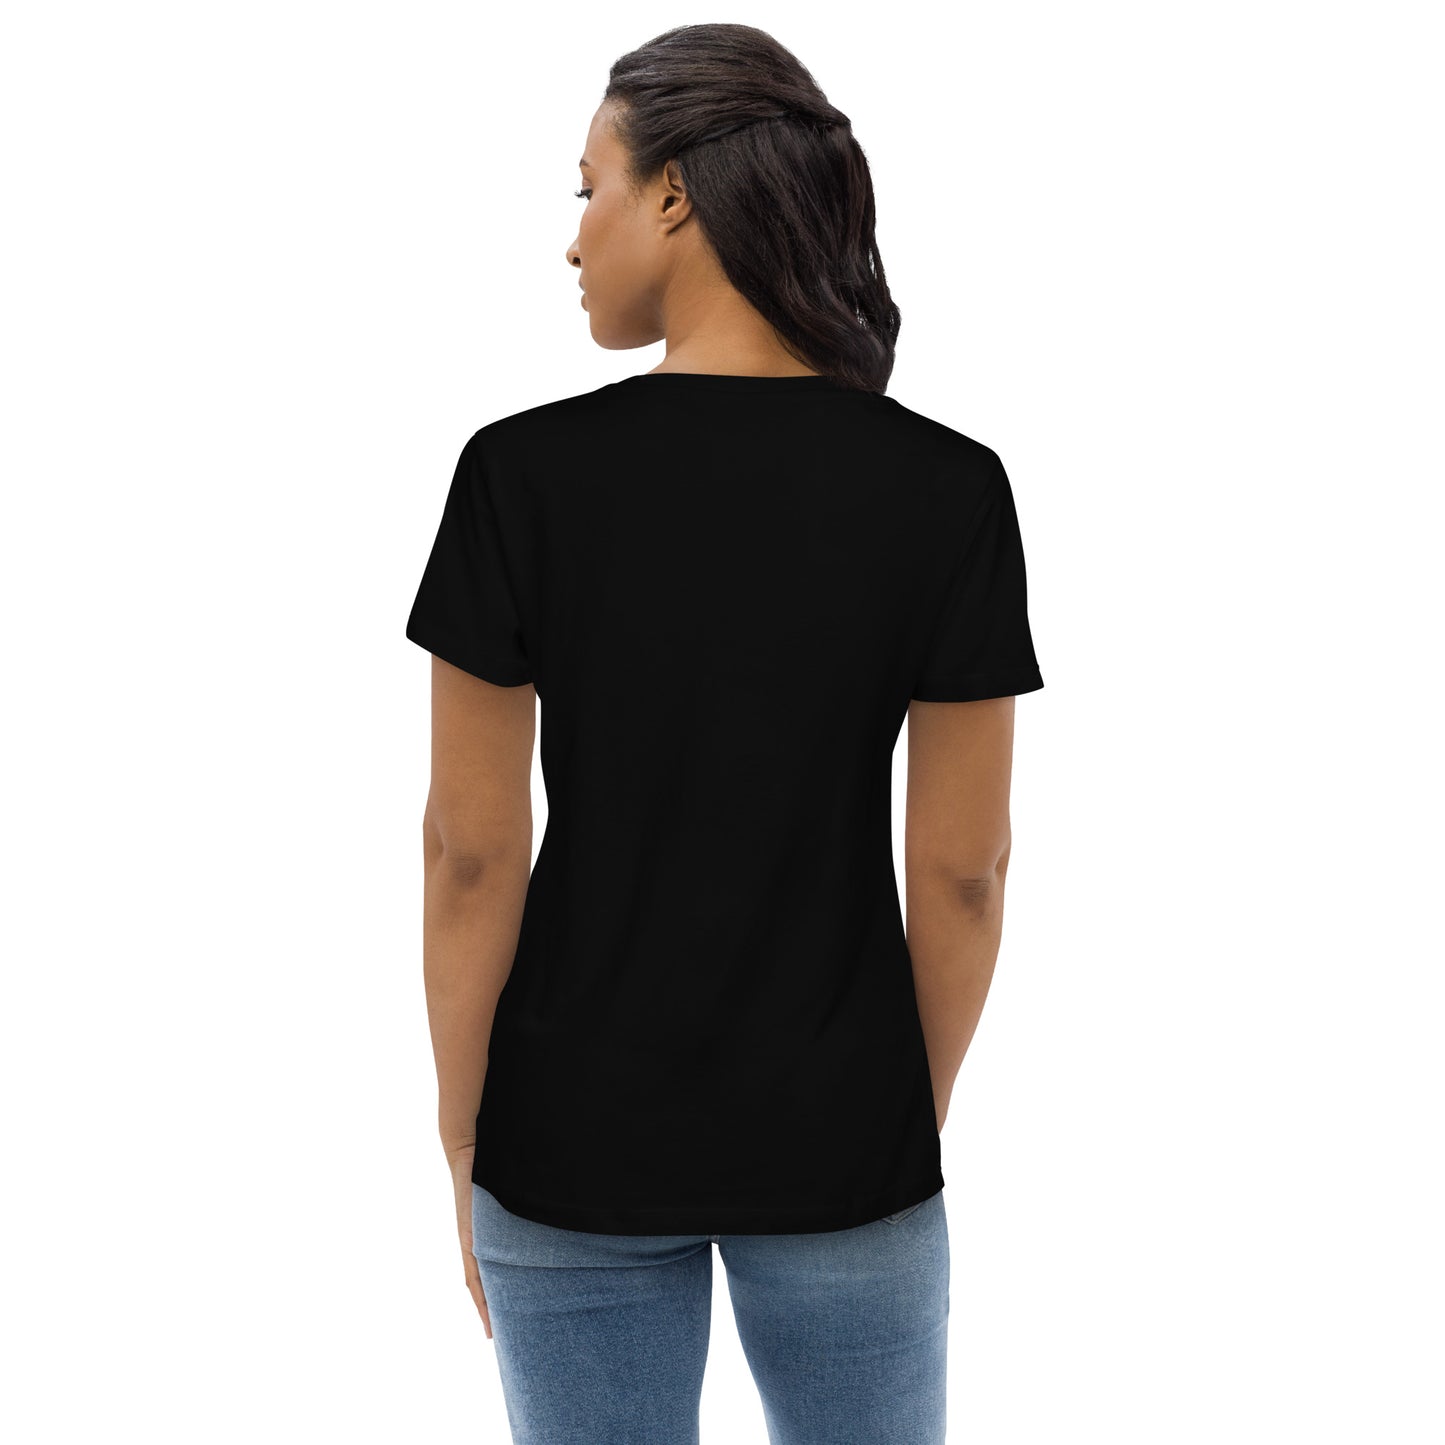 NEVER GIVE UP Women's Tee